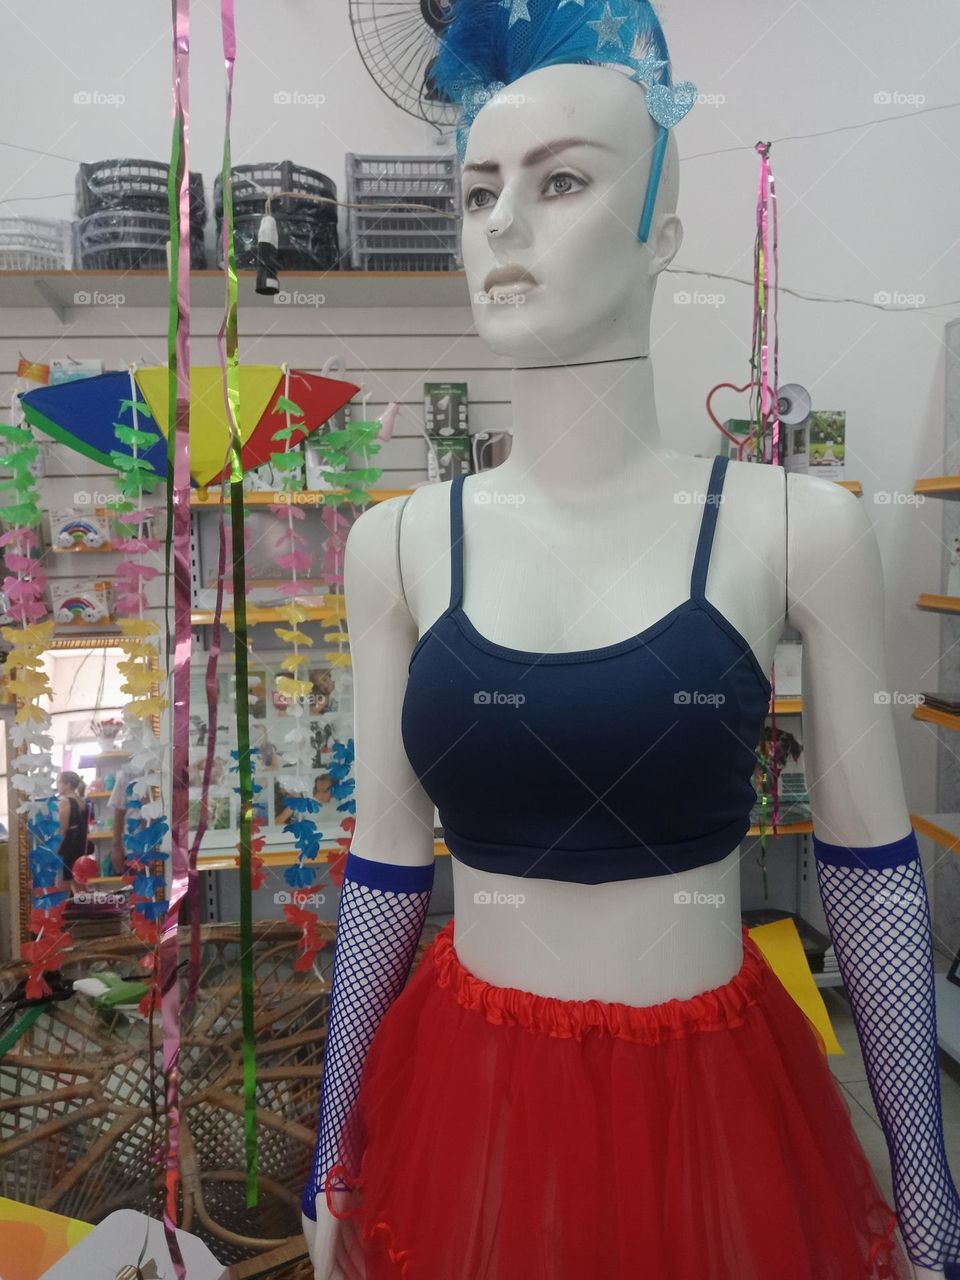 manequin with outfit for carnaval, shop ideas